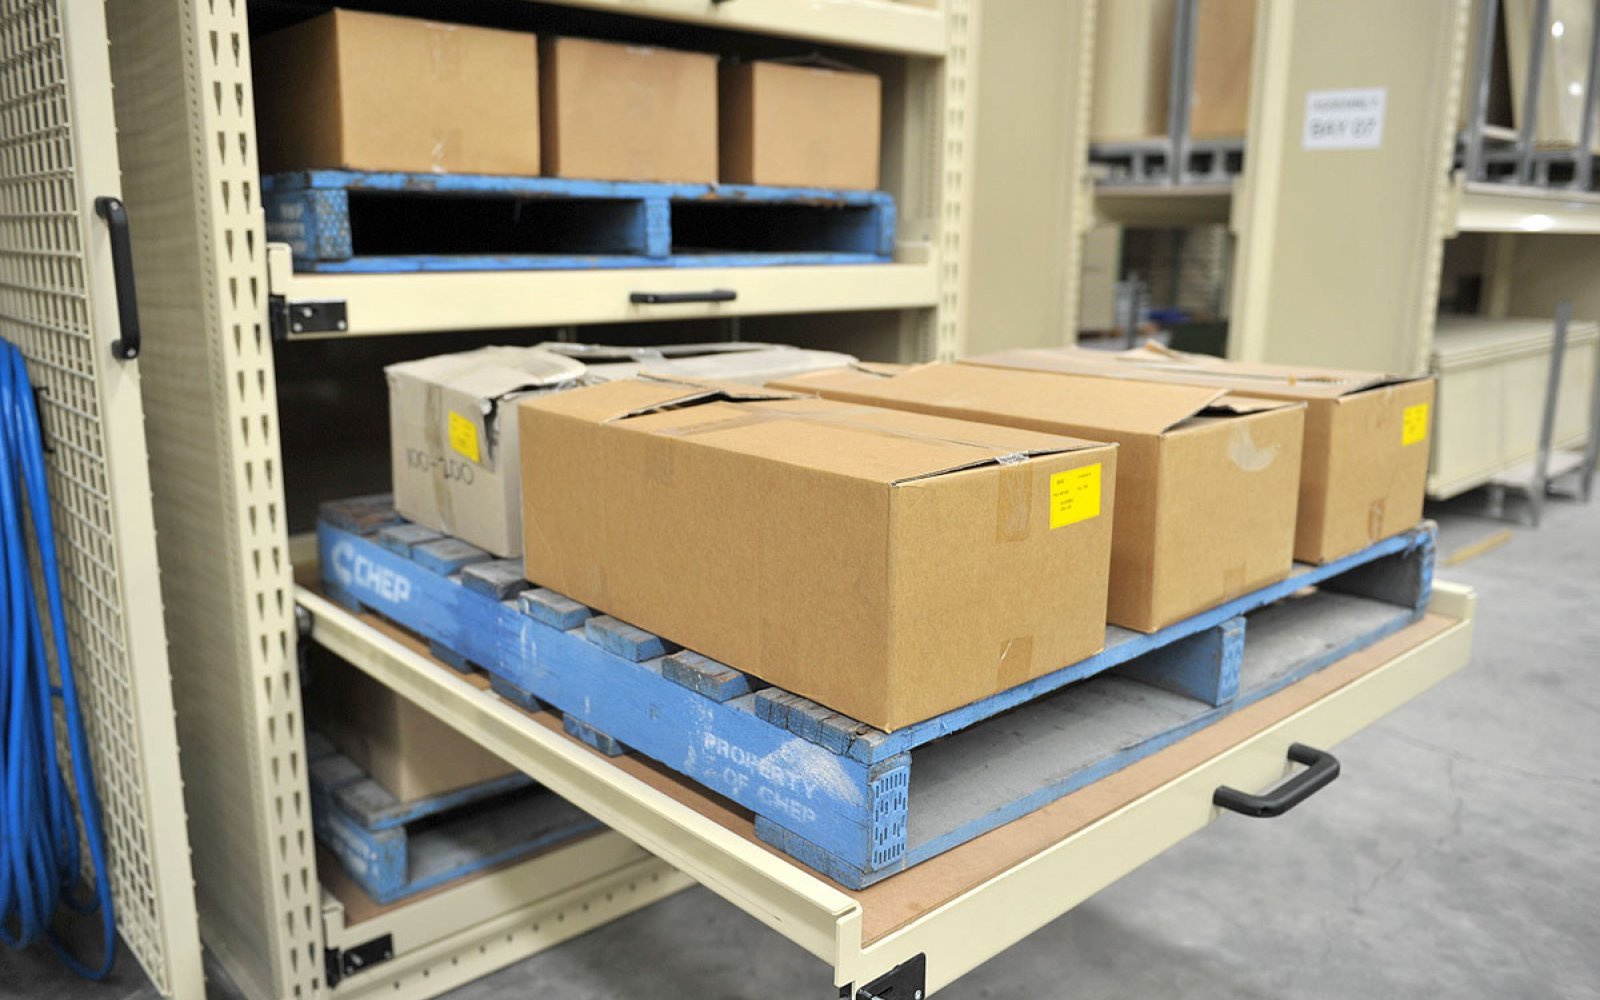 BAC 77 Heavy Duty Drawer storage for heavy loads and pallets